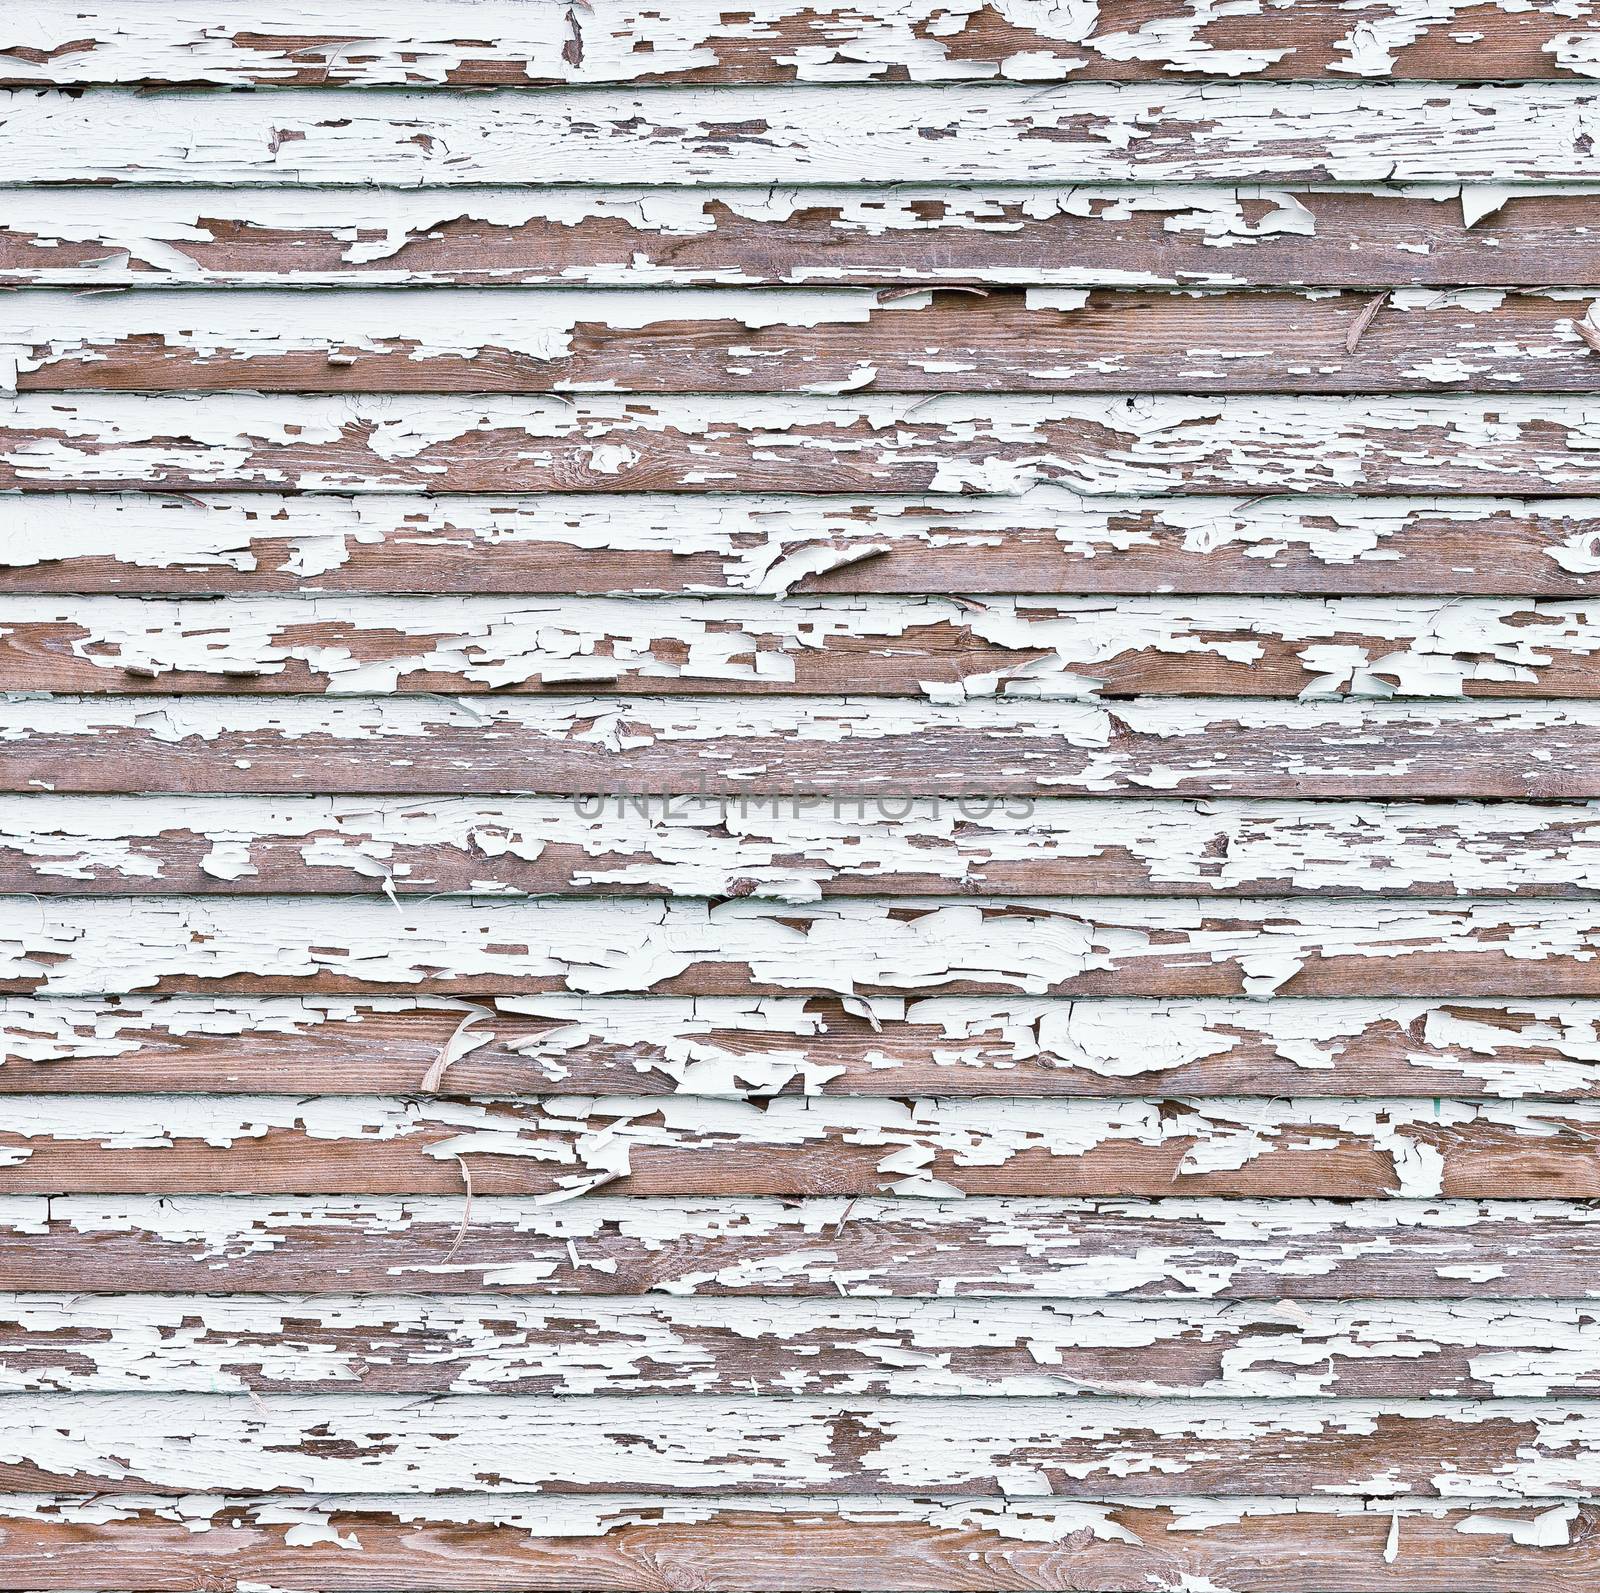 Old white weathered wooden background